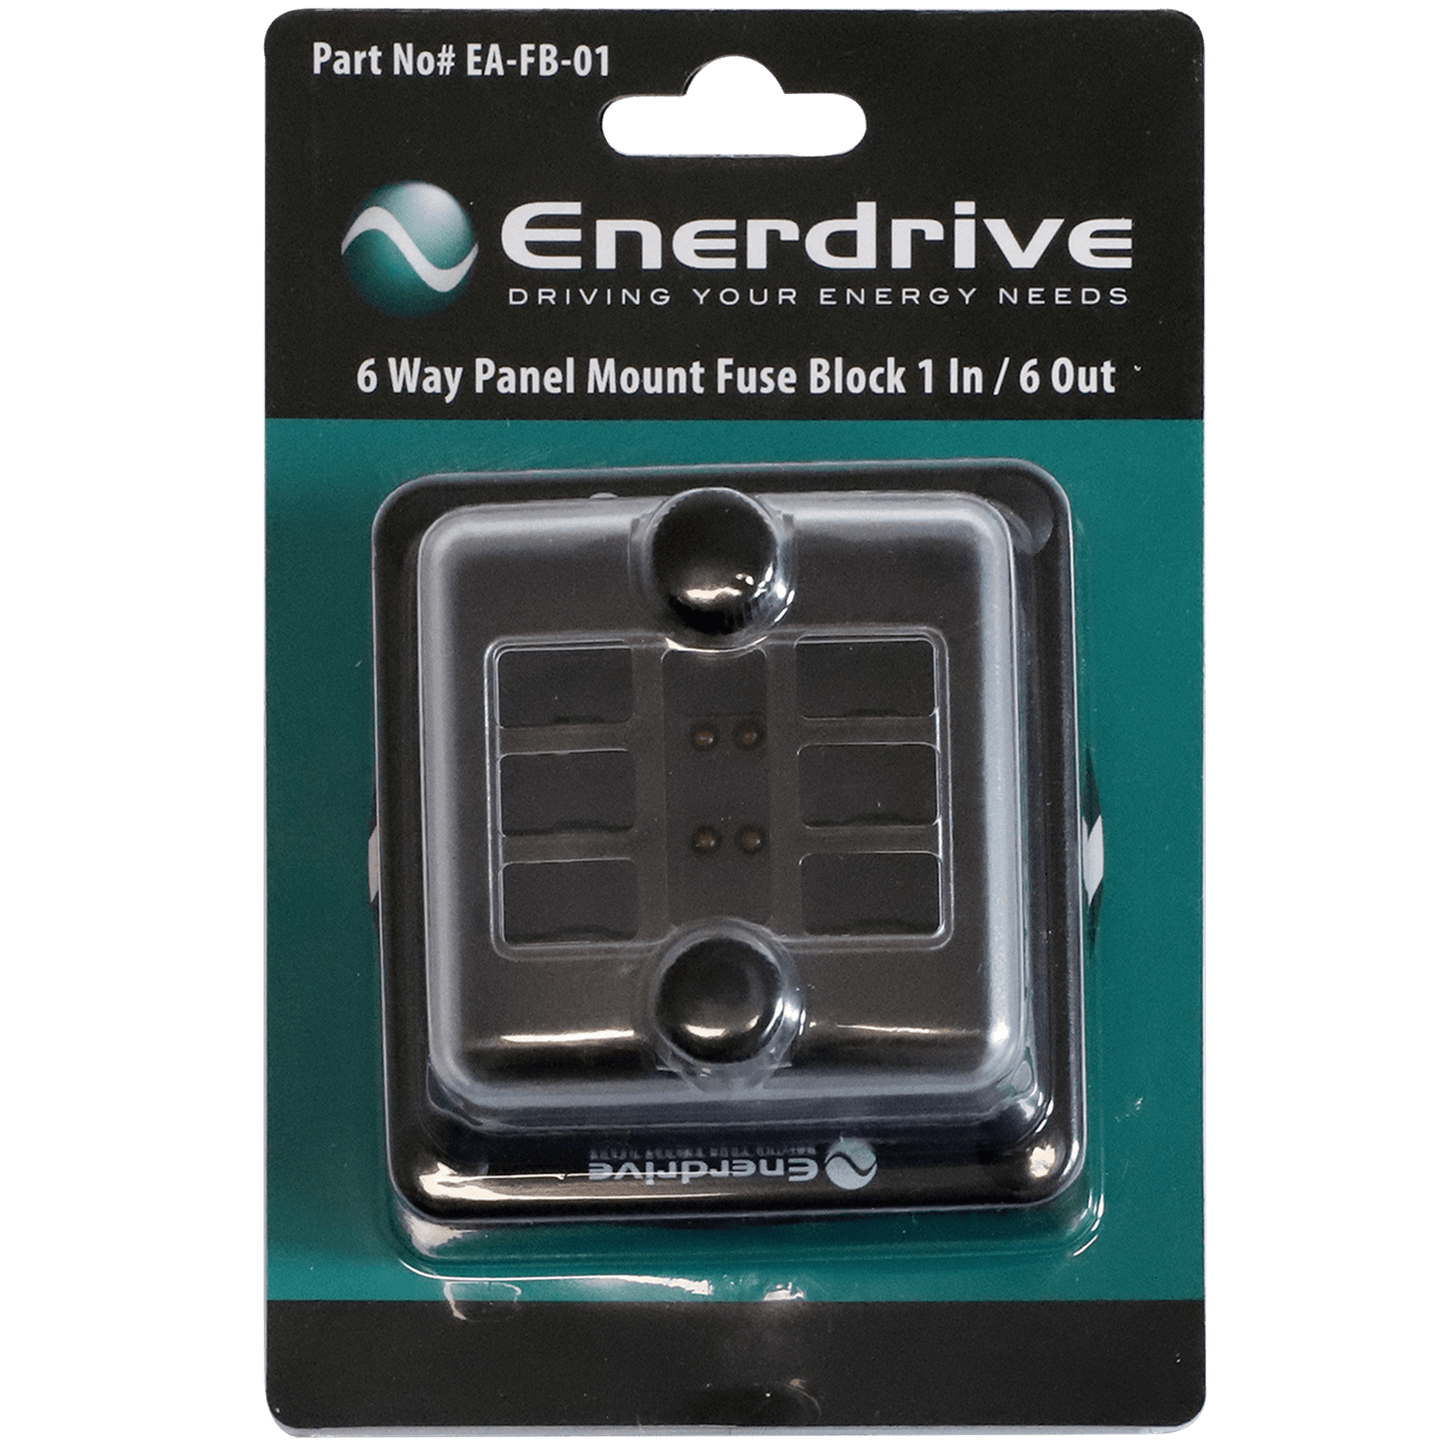 Enerdrive Fuse Block Panel Mount 1 In 6 Out with LEDs